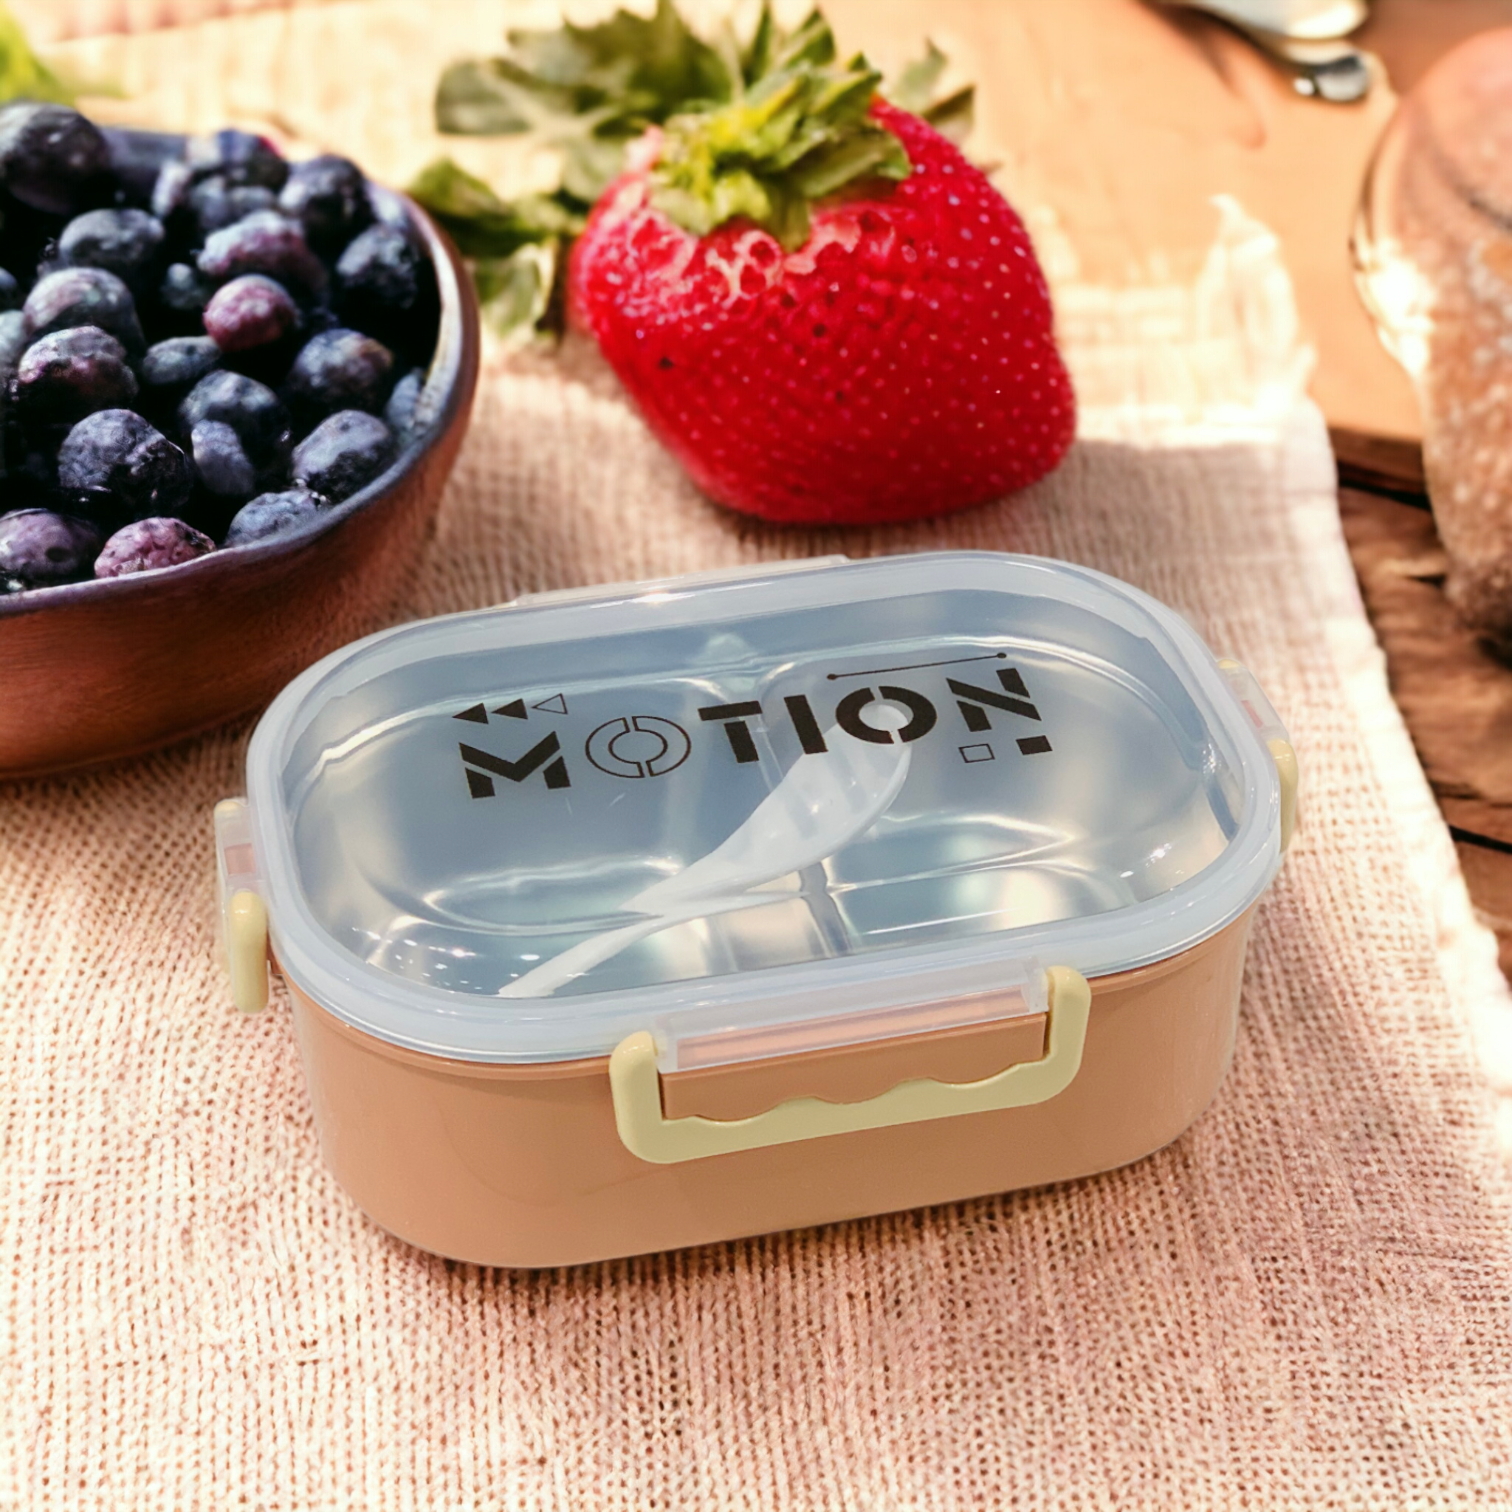 Motion Printed Lunch Box